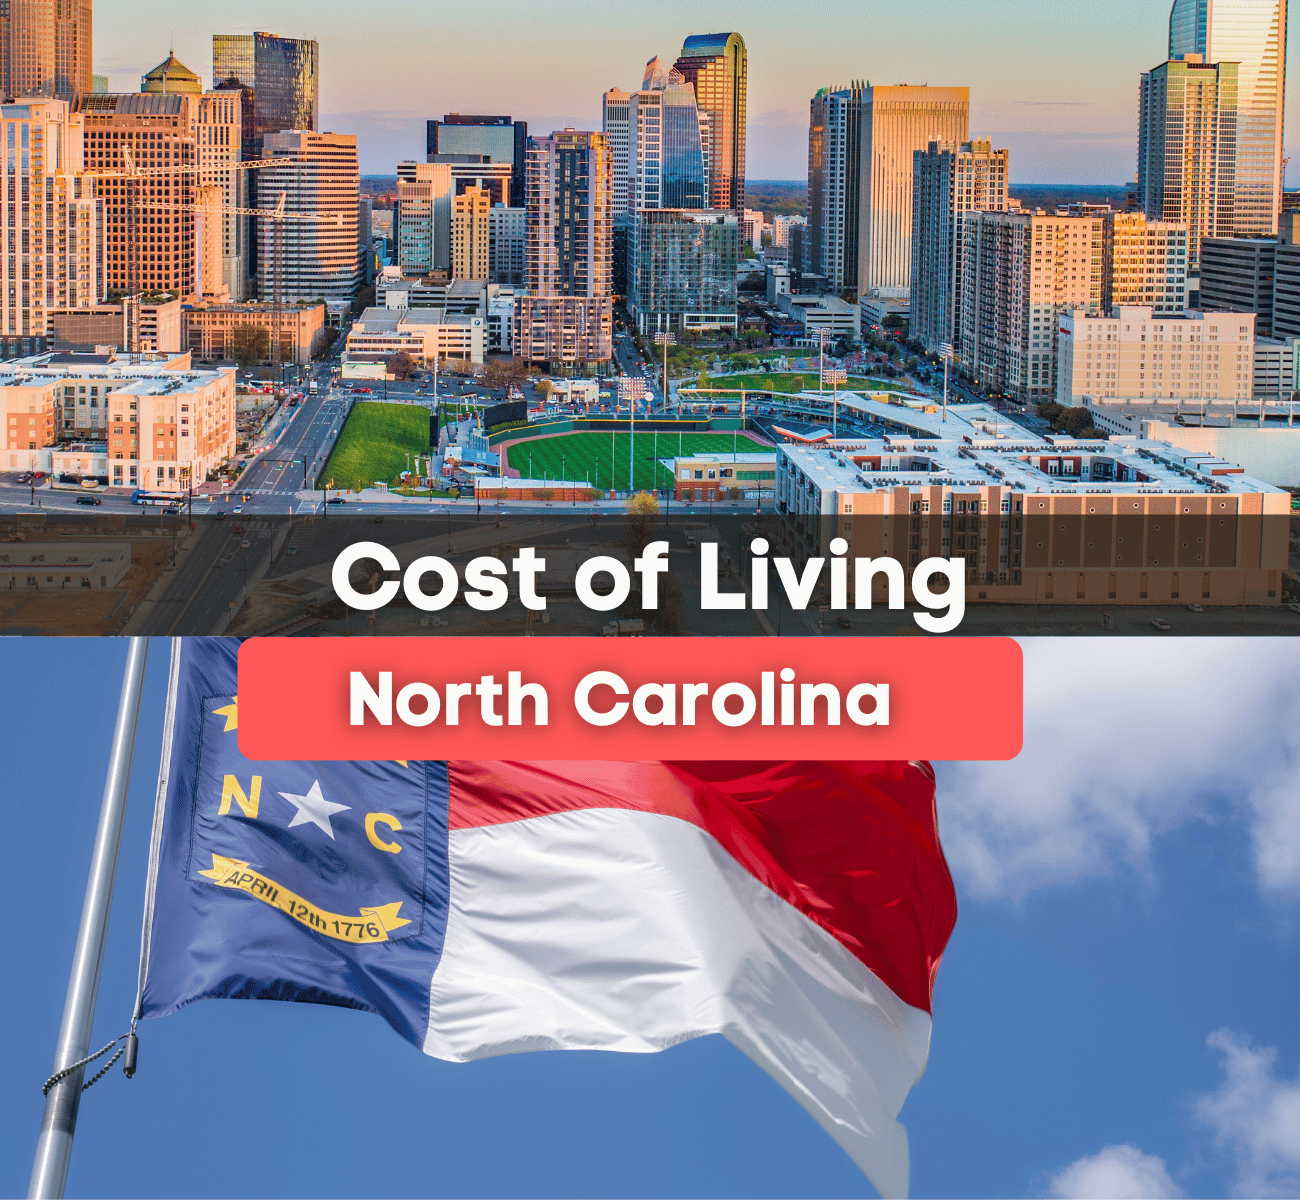 What is the Cost of Living in North Carolina?